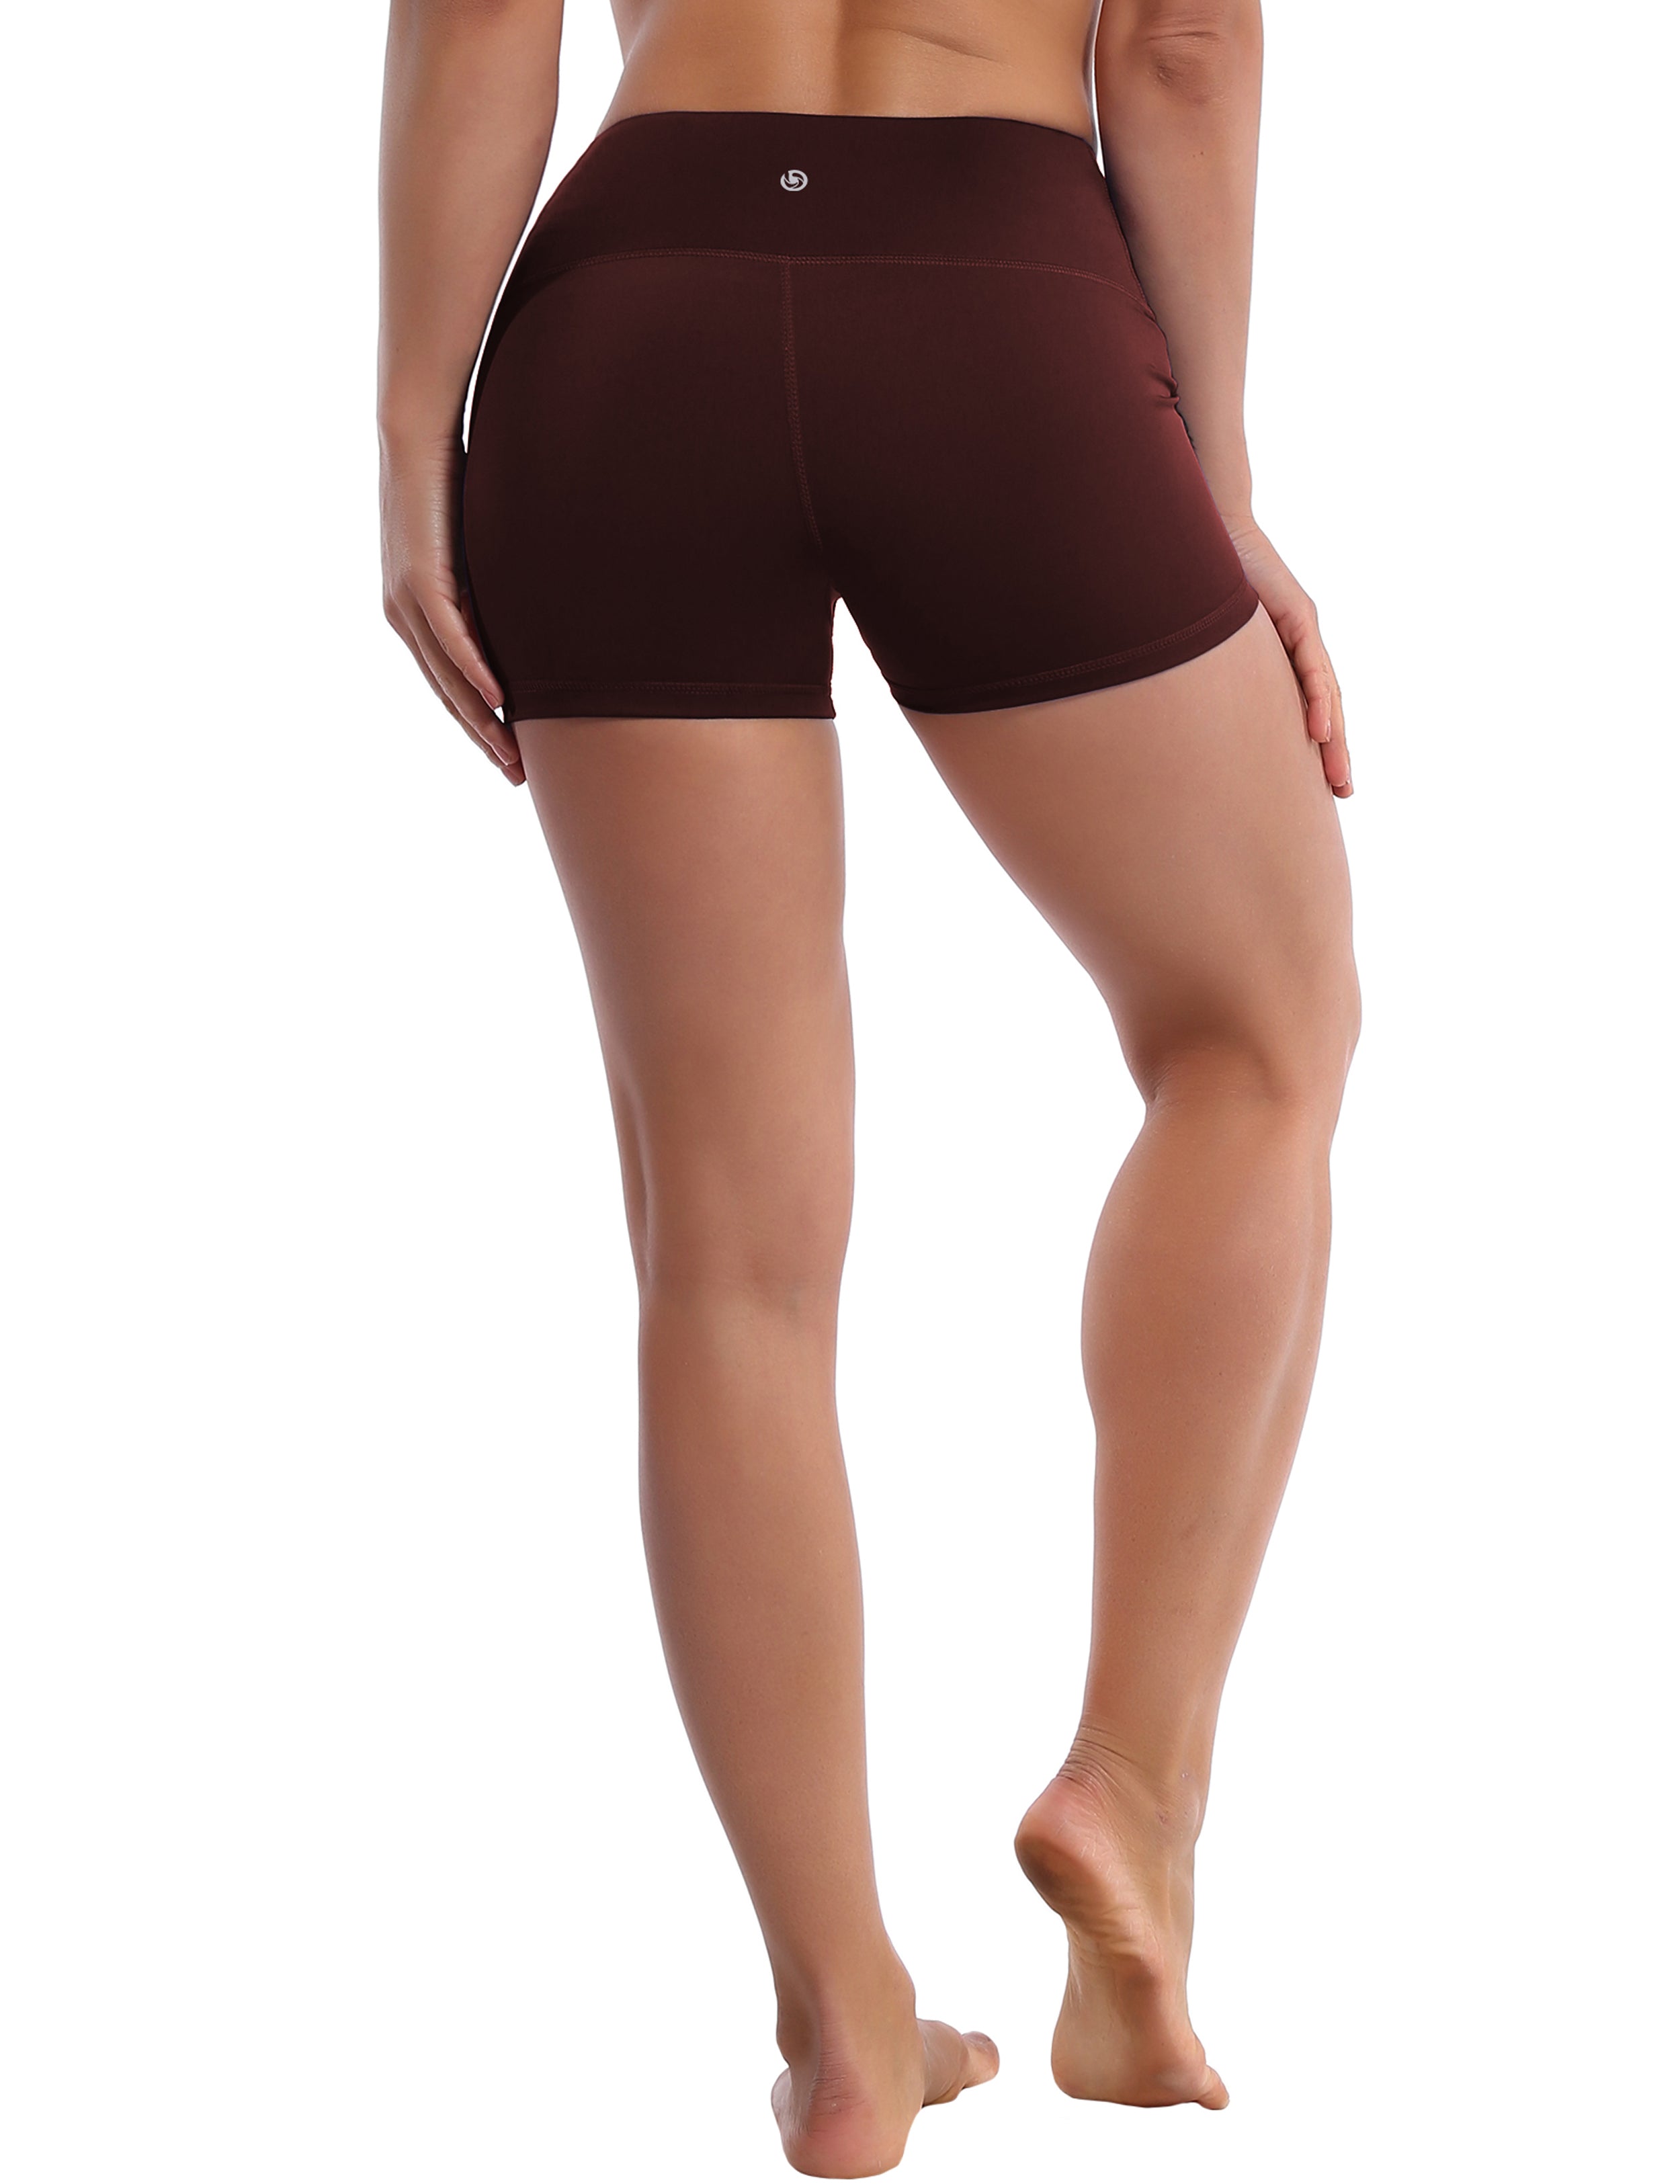 2.5" Golf Shorts mahoganymaroon Softest-ever fabric High elasticity High density 4-way stretch Fabric doesn't attract lint easily No see-through Moisture-wicking Machine wash 75% Nylon, 25% Spandex